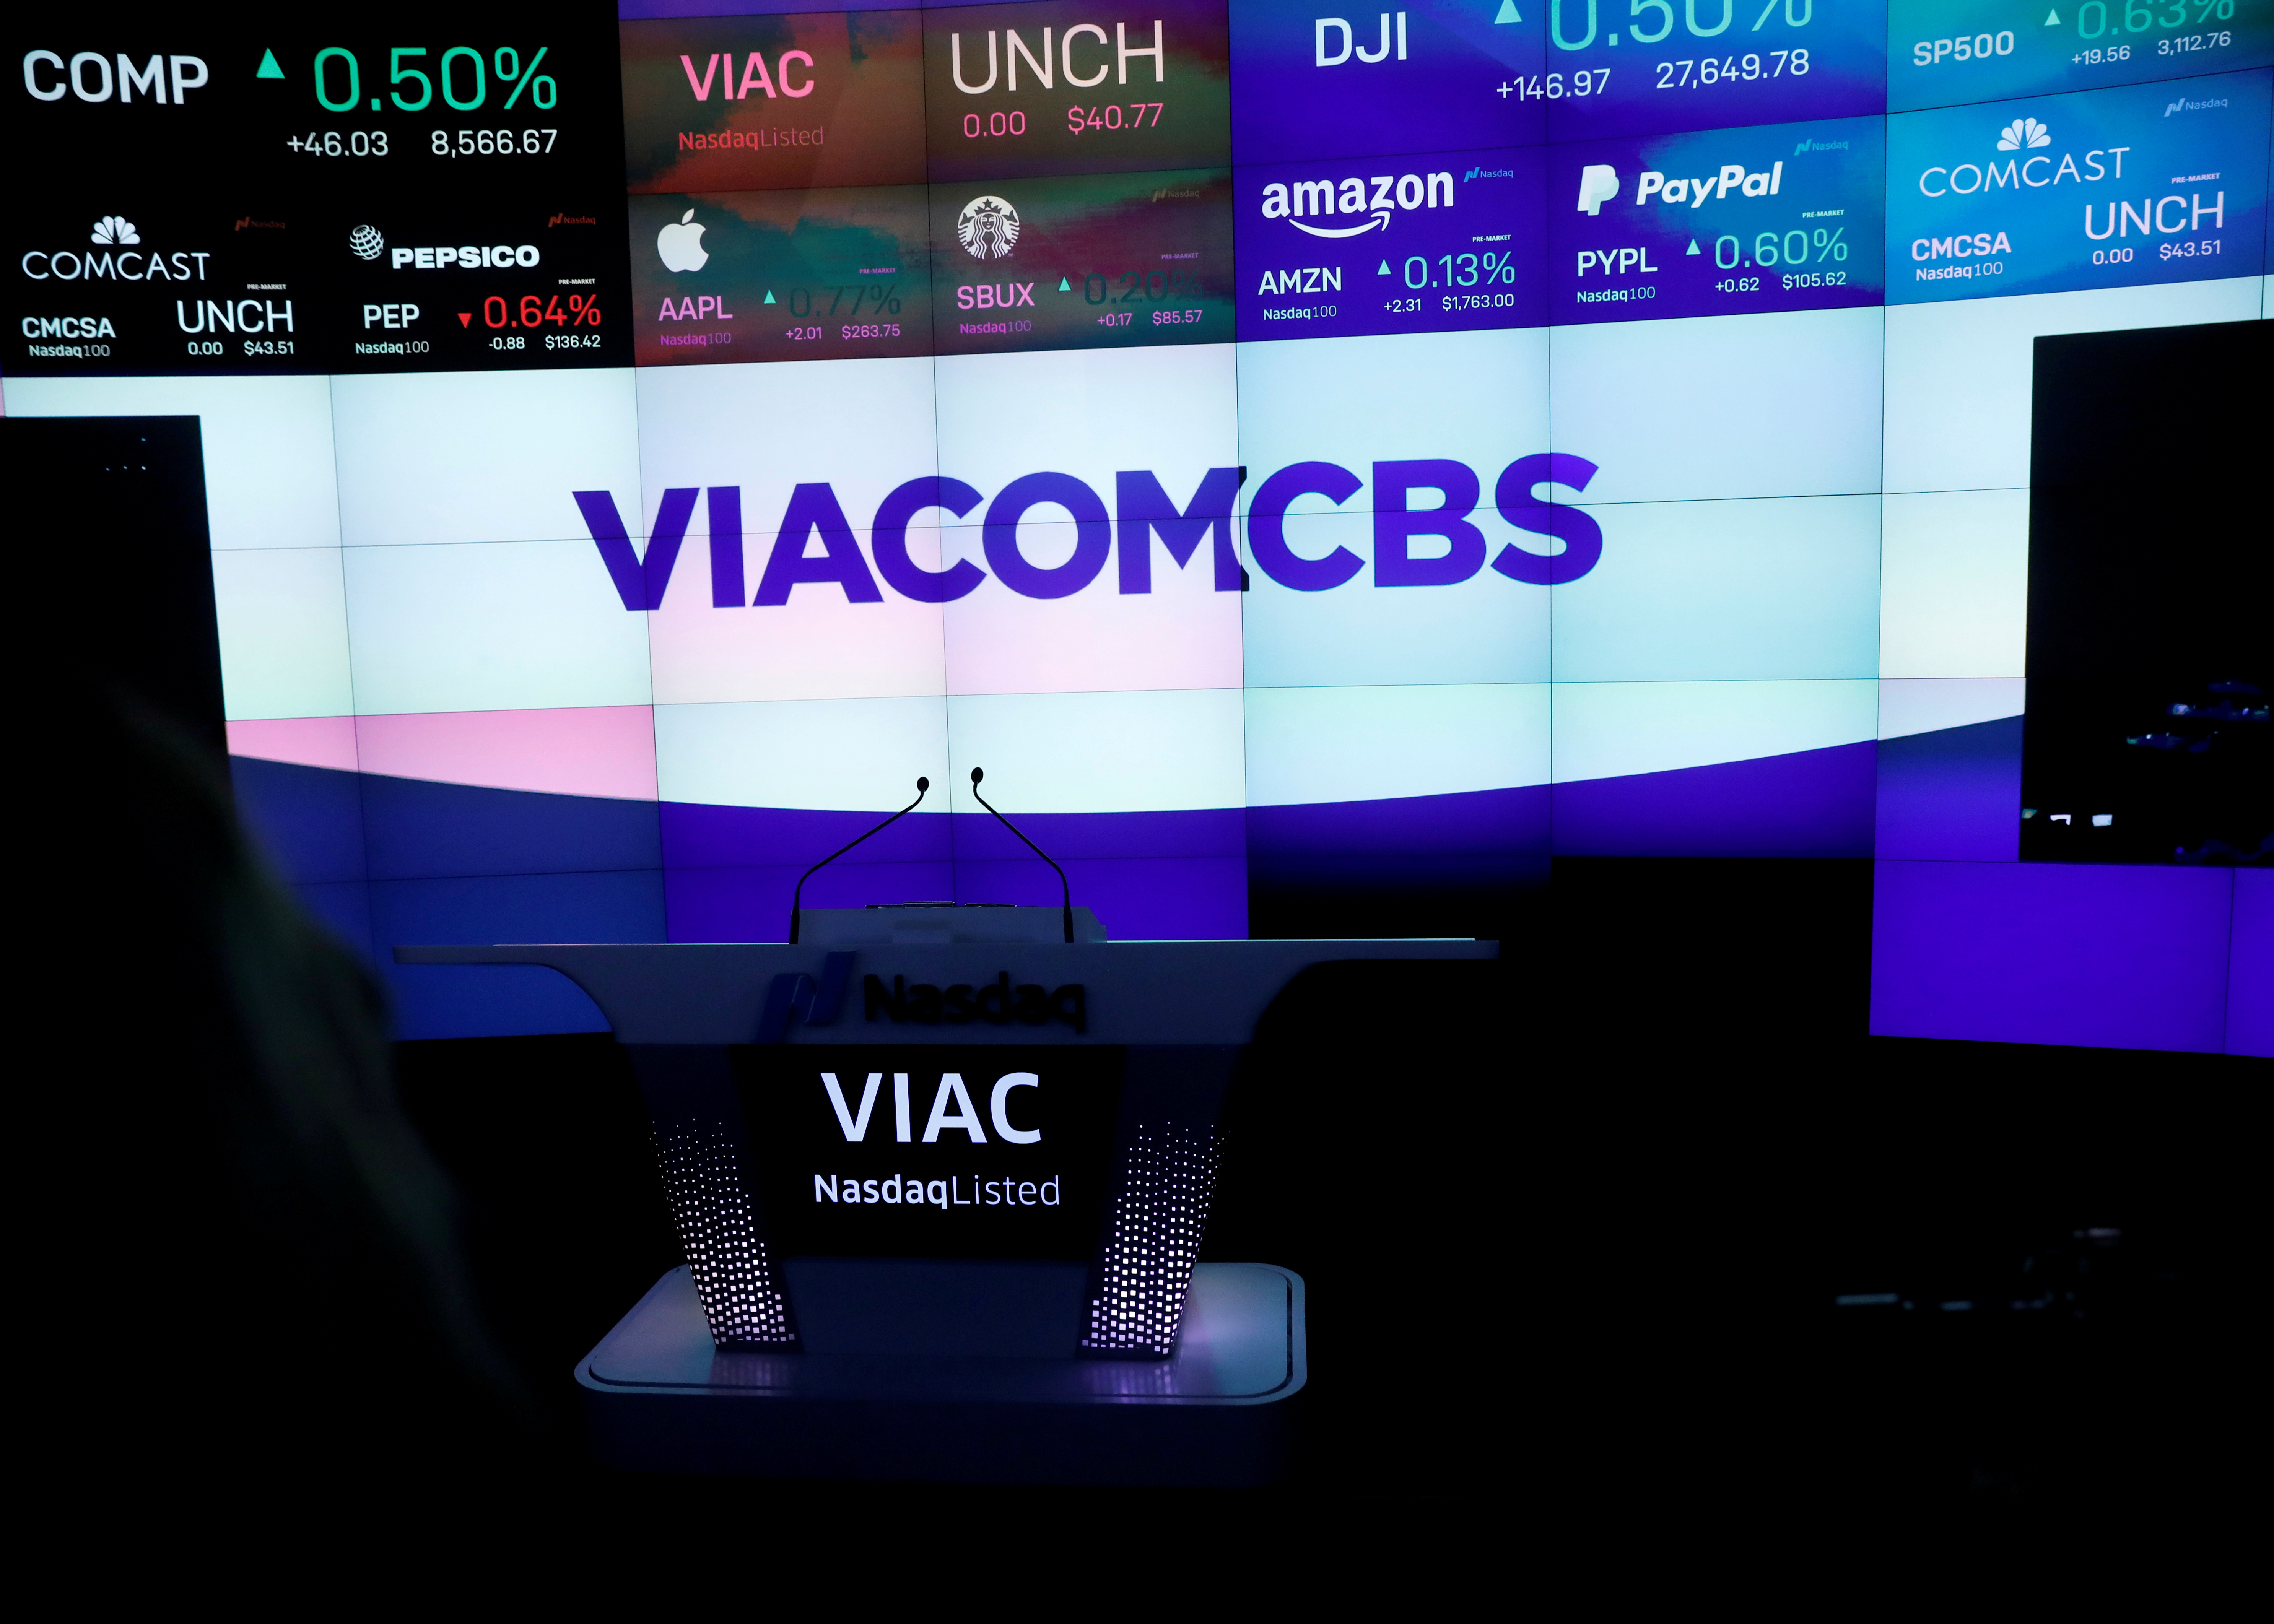 The ViacomCBS logo is displayed at the Nasdaq MarketSite to celebrate the company's merger, in New York